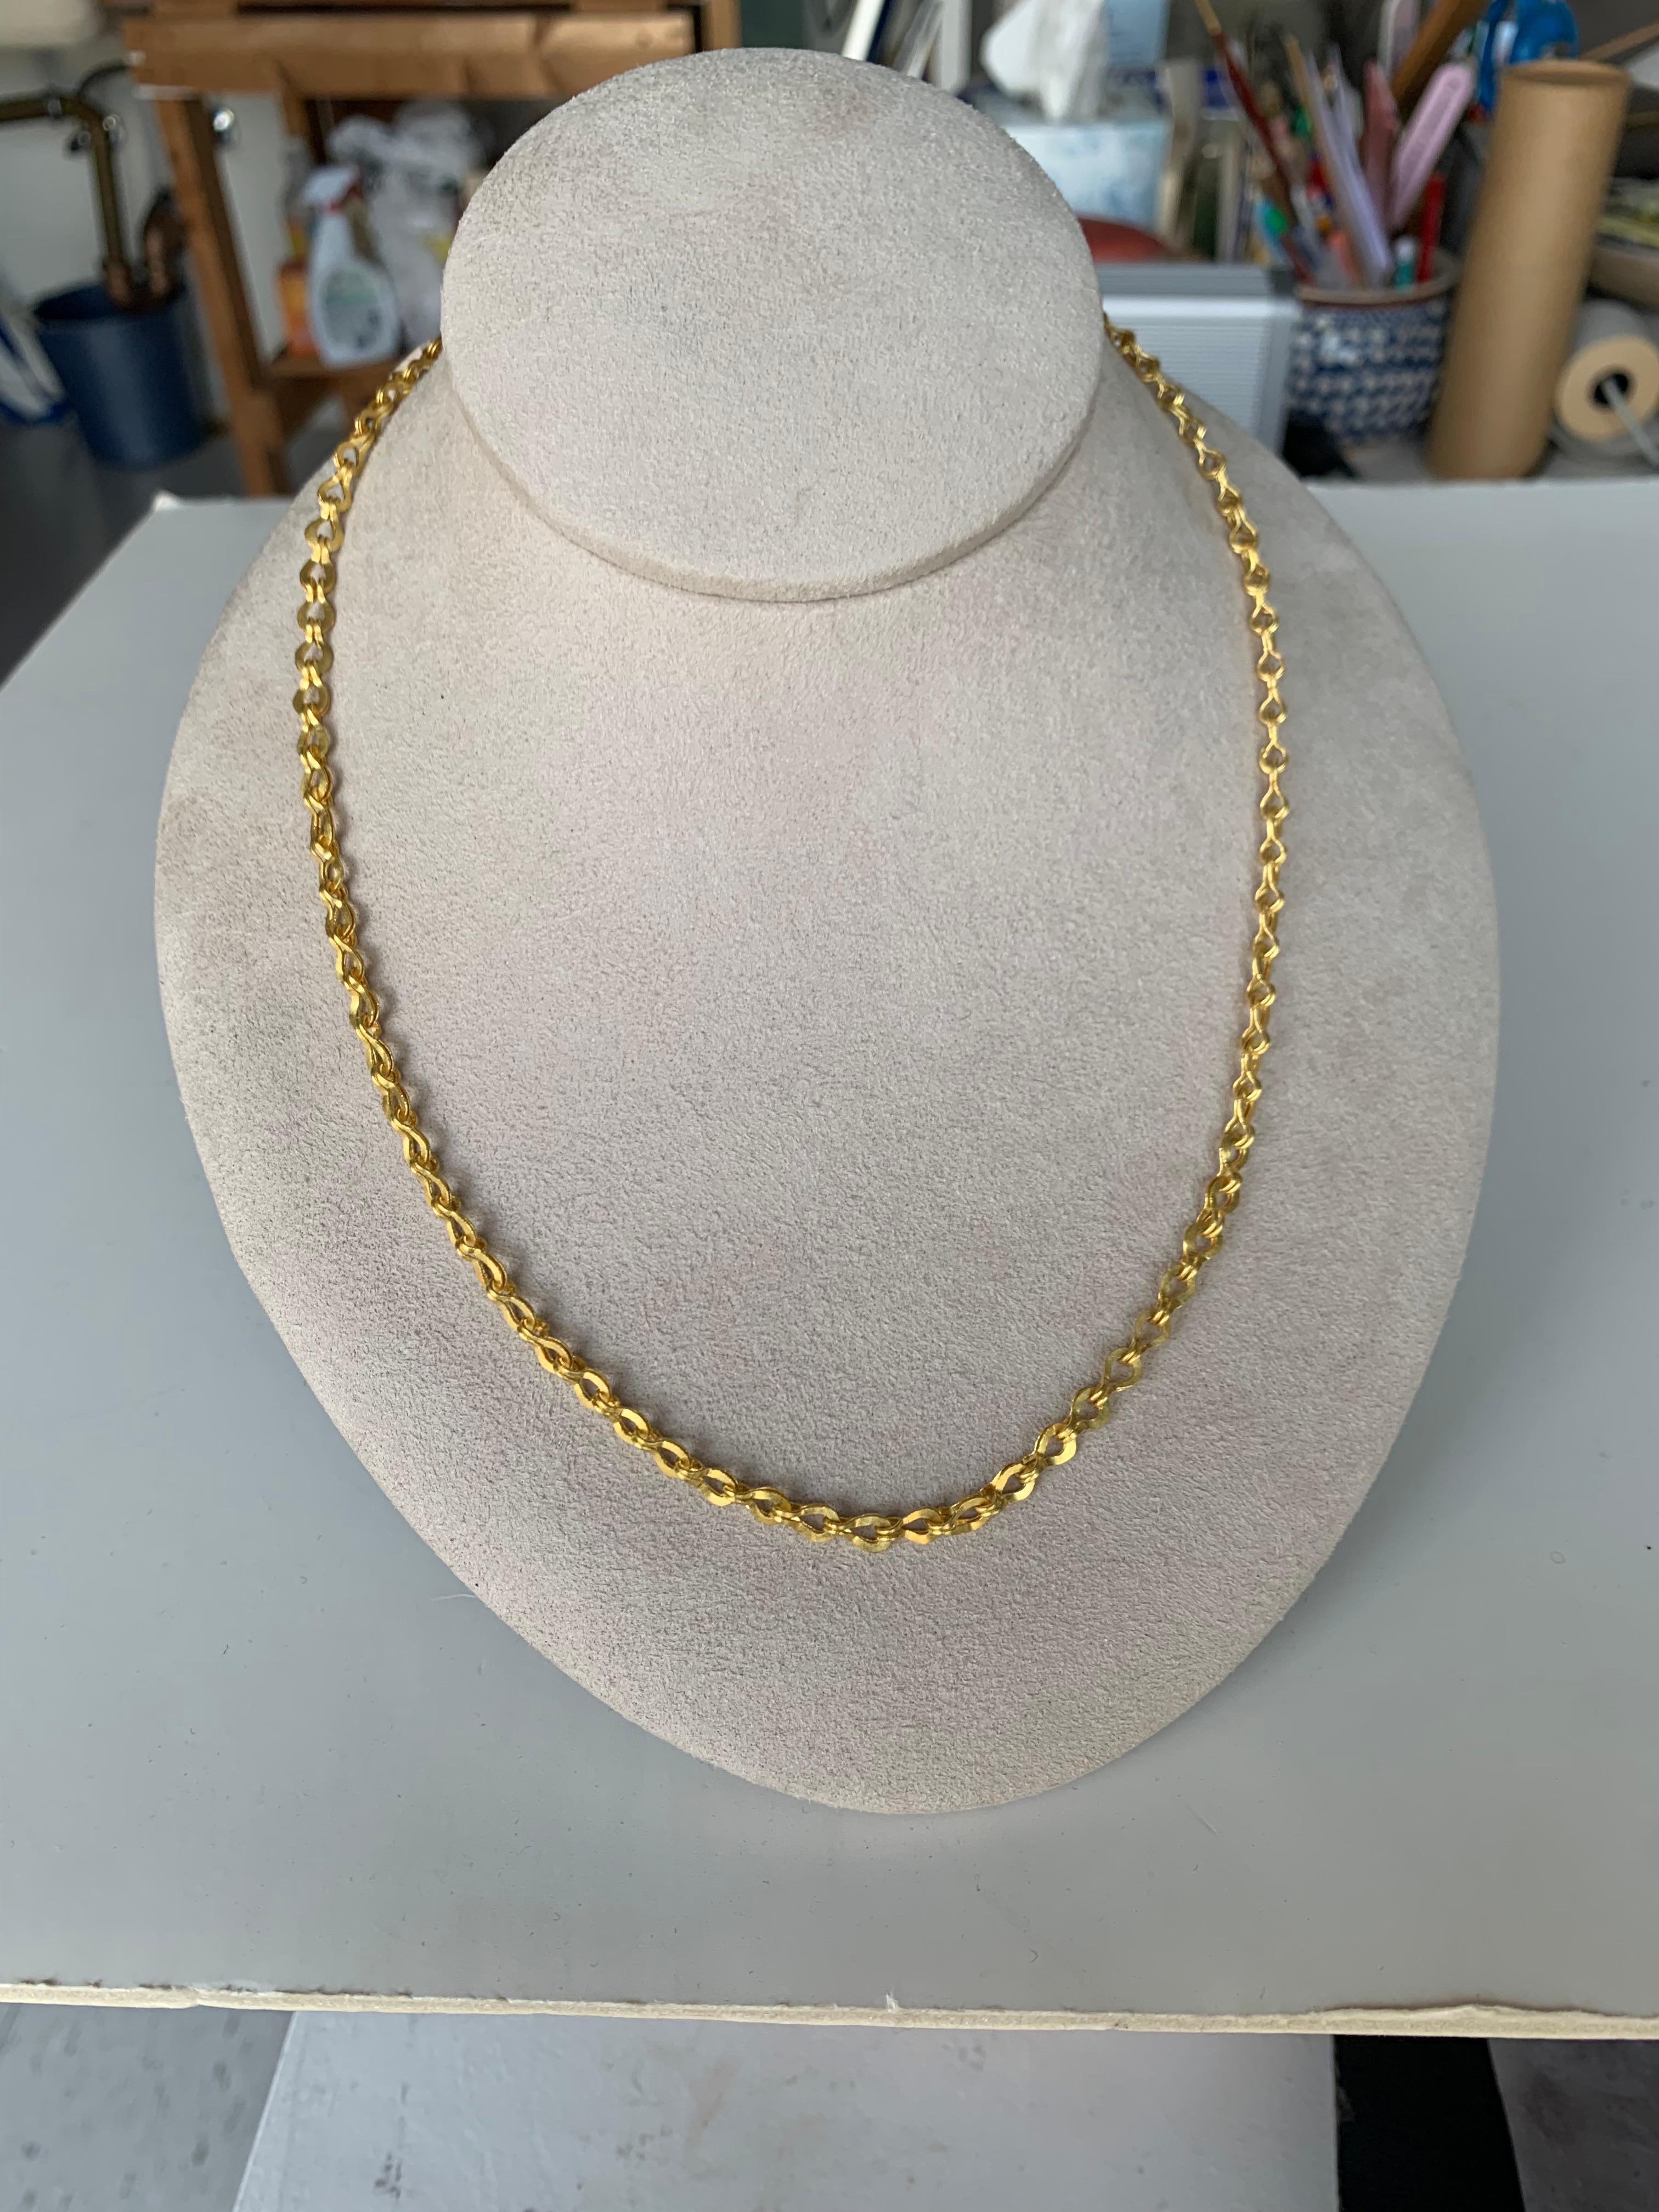 Inspired by Greek/Roman jewelry this planished Sailor's knot chain is 20 inches long with Ruby cabochon clasp and granulation.
The ruby weighs .50 carat
This lovely chain is entirely hand crafted, from  alloying the gold, pulling the wire, fusing